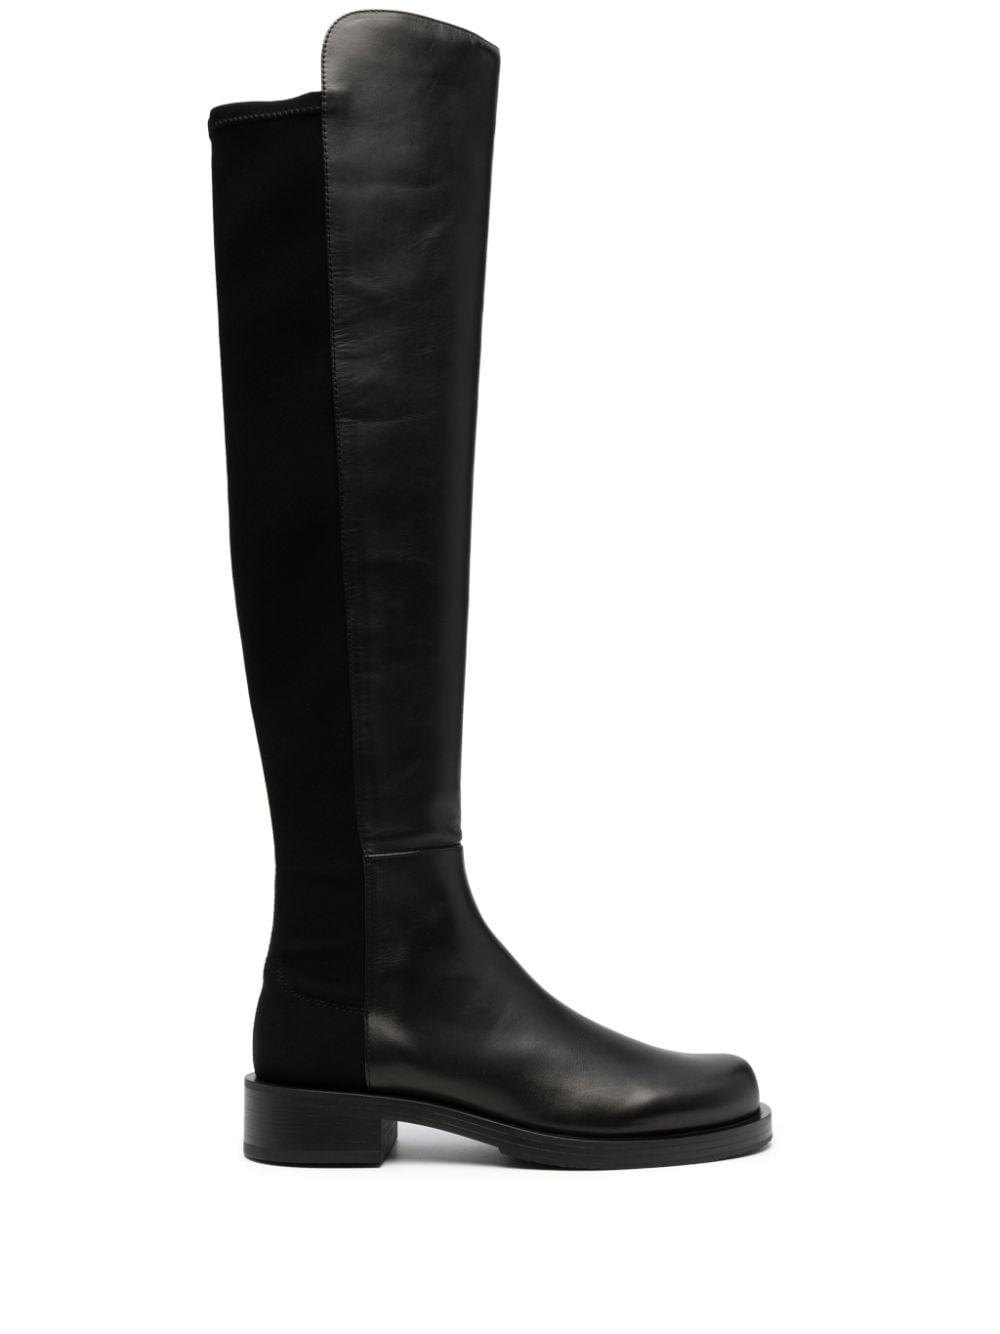 Stuart Weitzman 5050 Bold 35mm Leather Boots in Black | Lyst